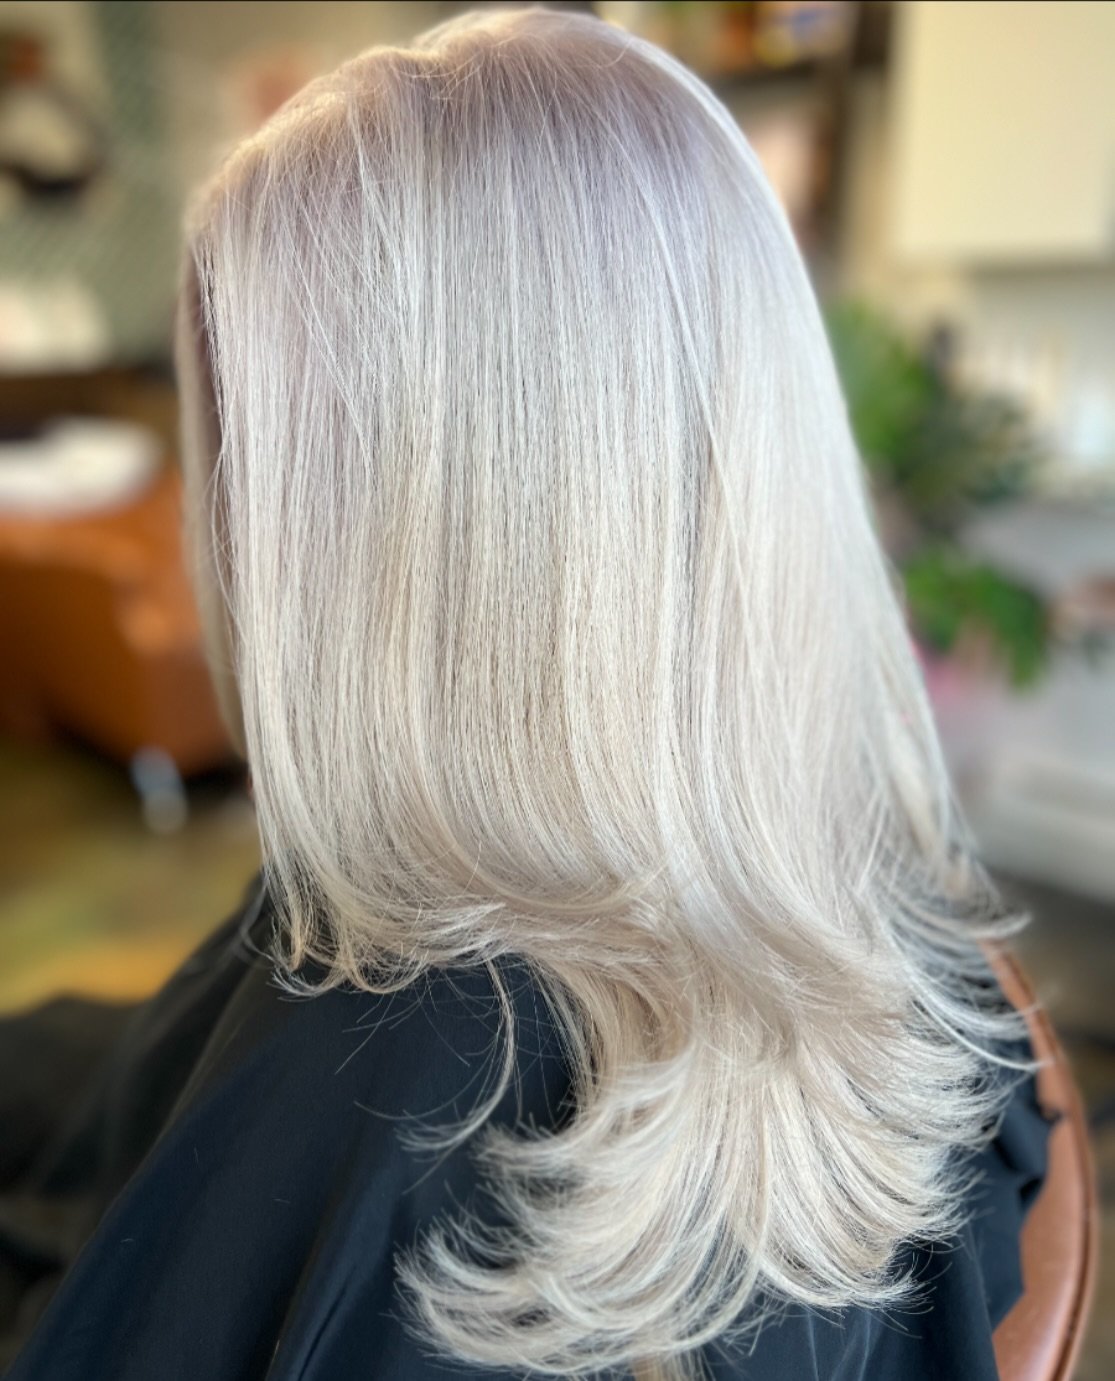 Reflecting as bright as the sun 🌞🪞🪩

bleach + gloss + @k18hair for protection 

book your next appt online or call 248-759-1203

#blondesofinstagram #blondehair #evohair #stylistsupportingstylists #salonandrefillery #springvibes #platinumblonde #k